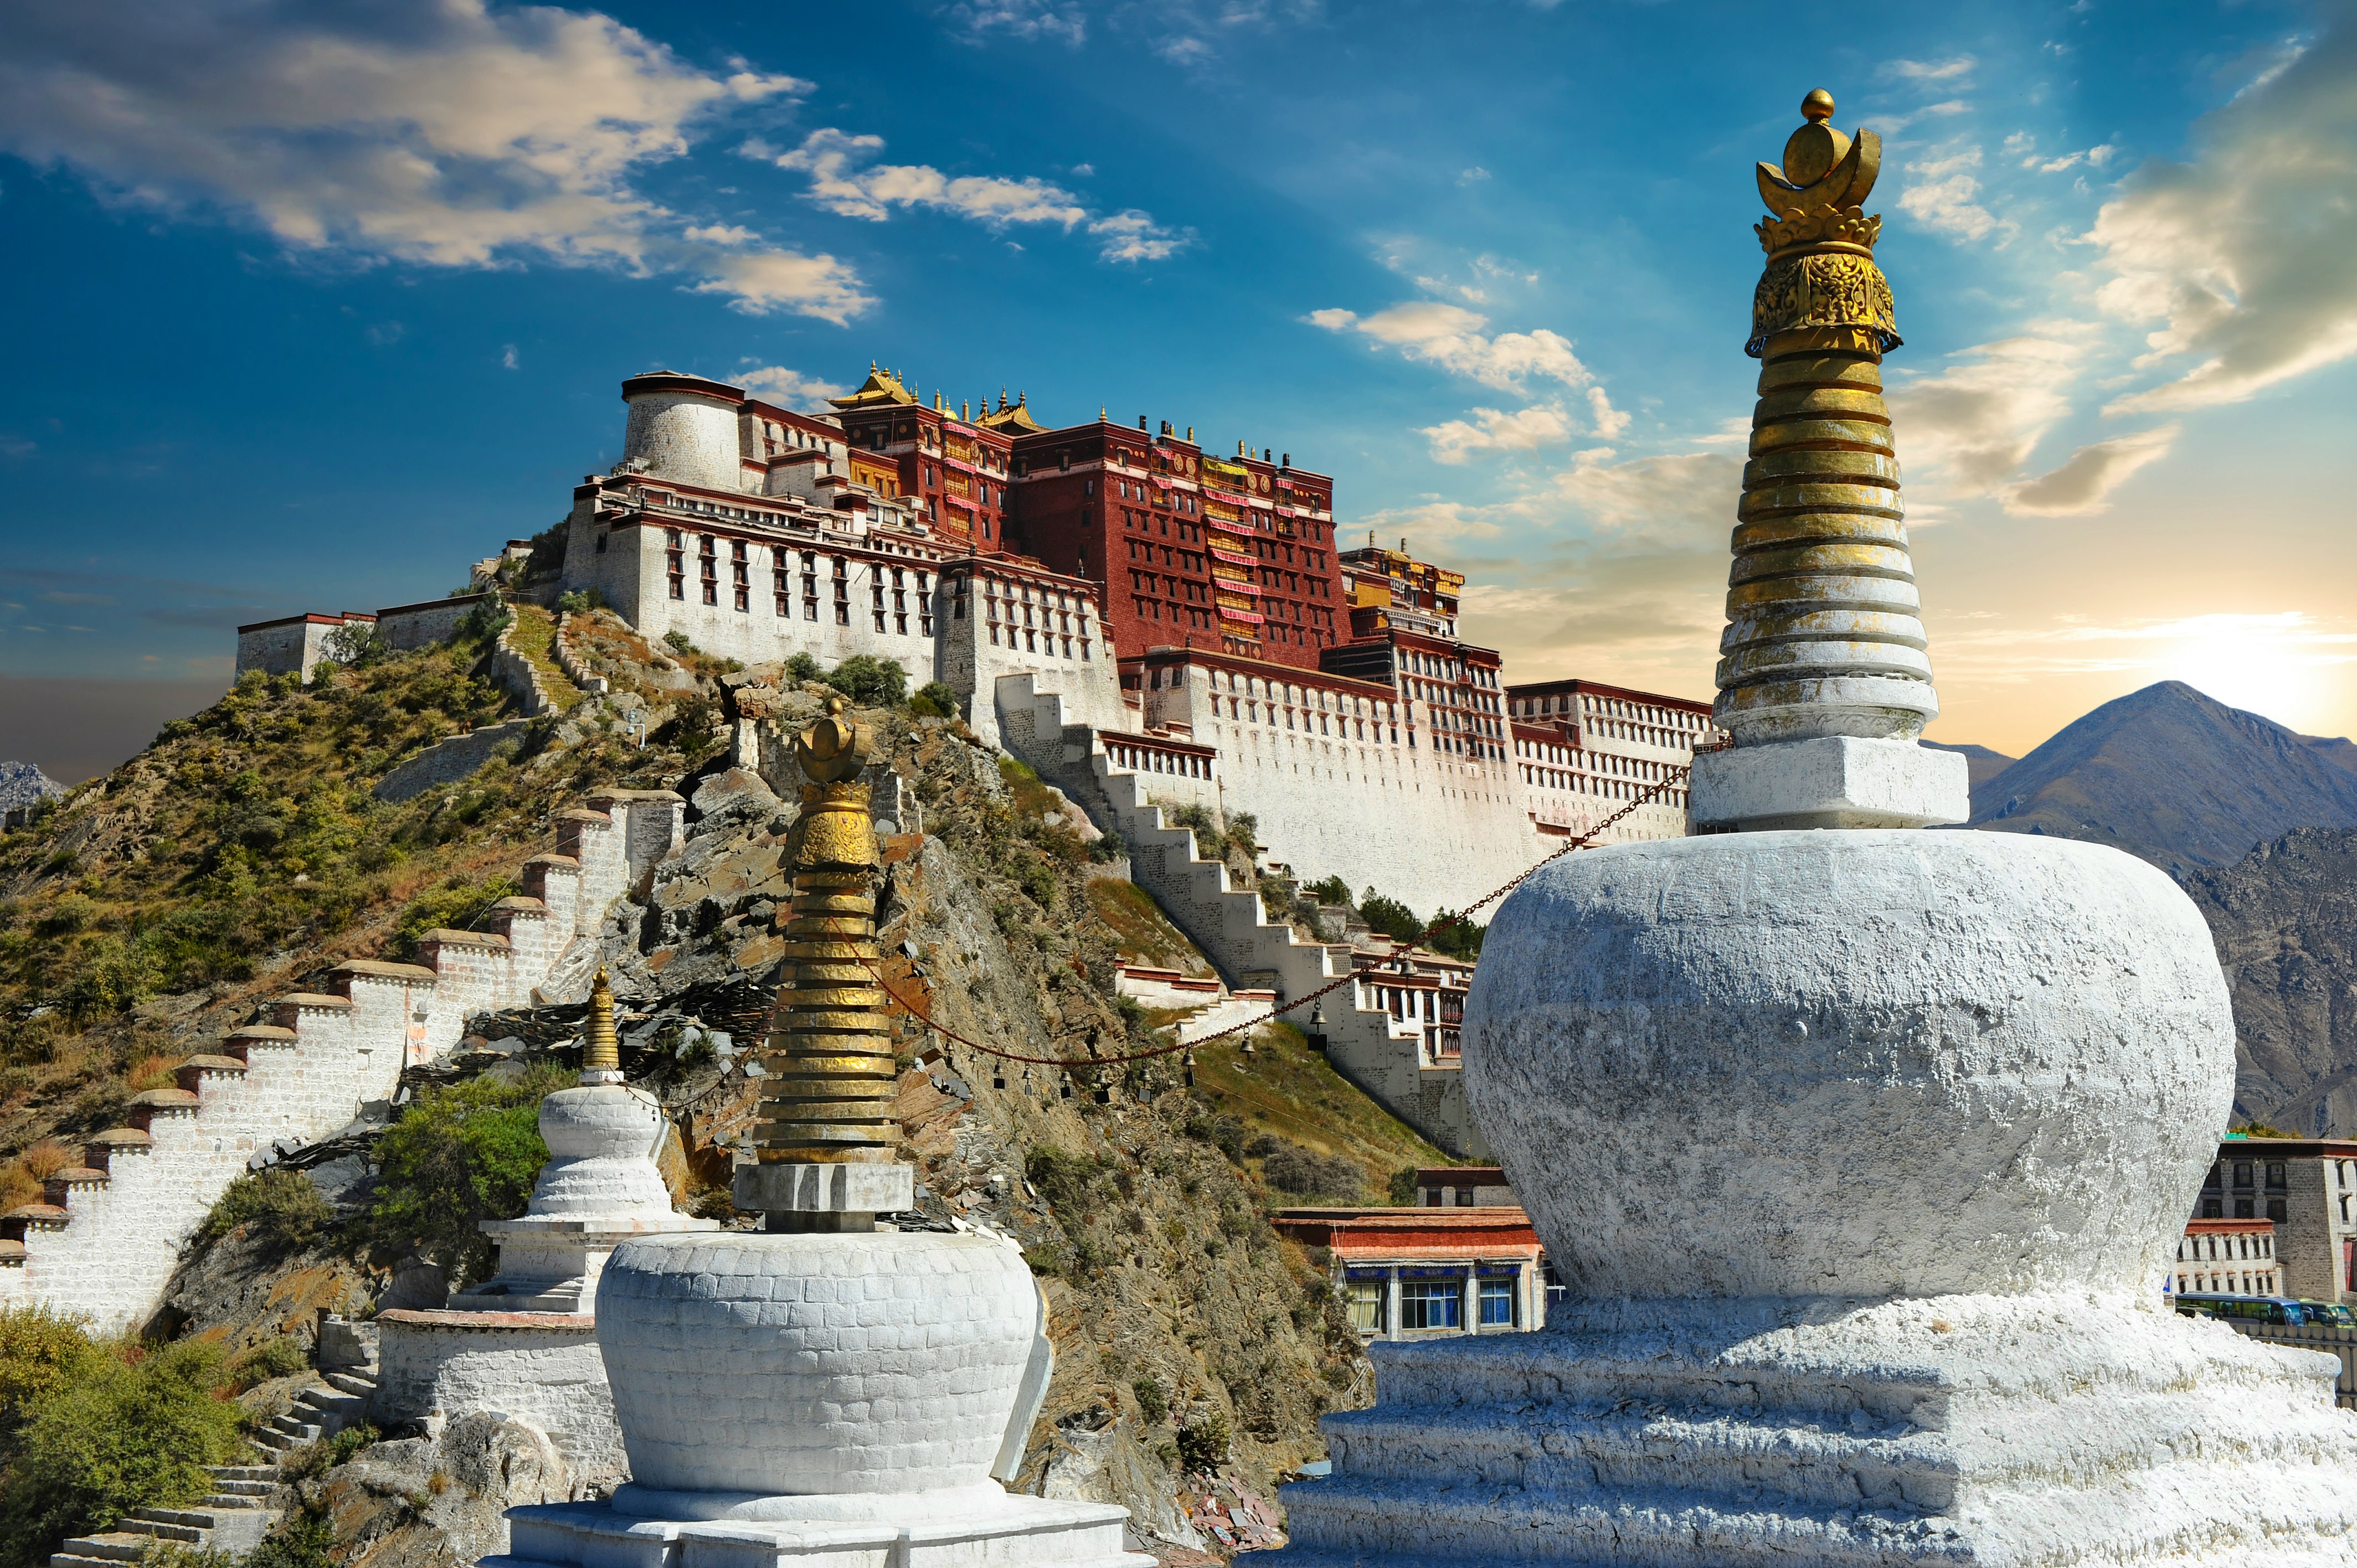 The Potala Palace in Tibet during sunset – © ©wusuowei - stock.adobe.com